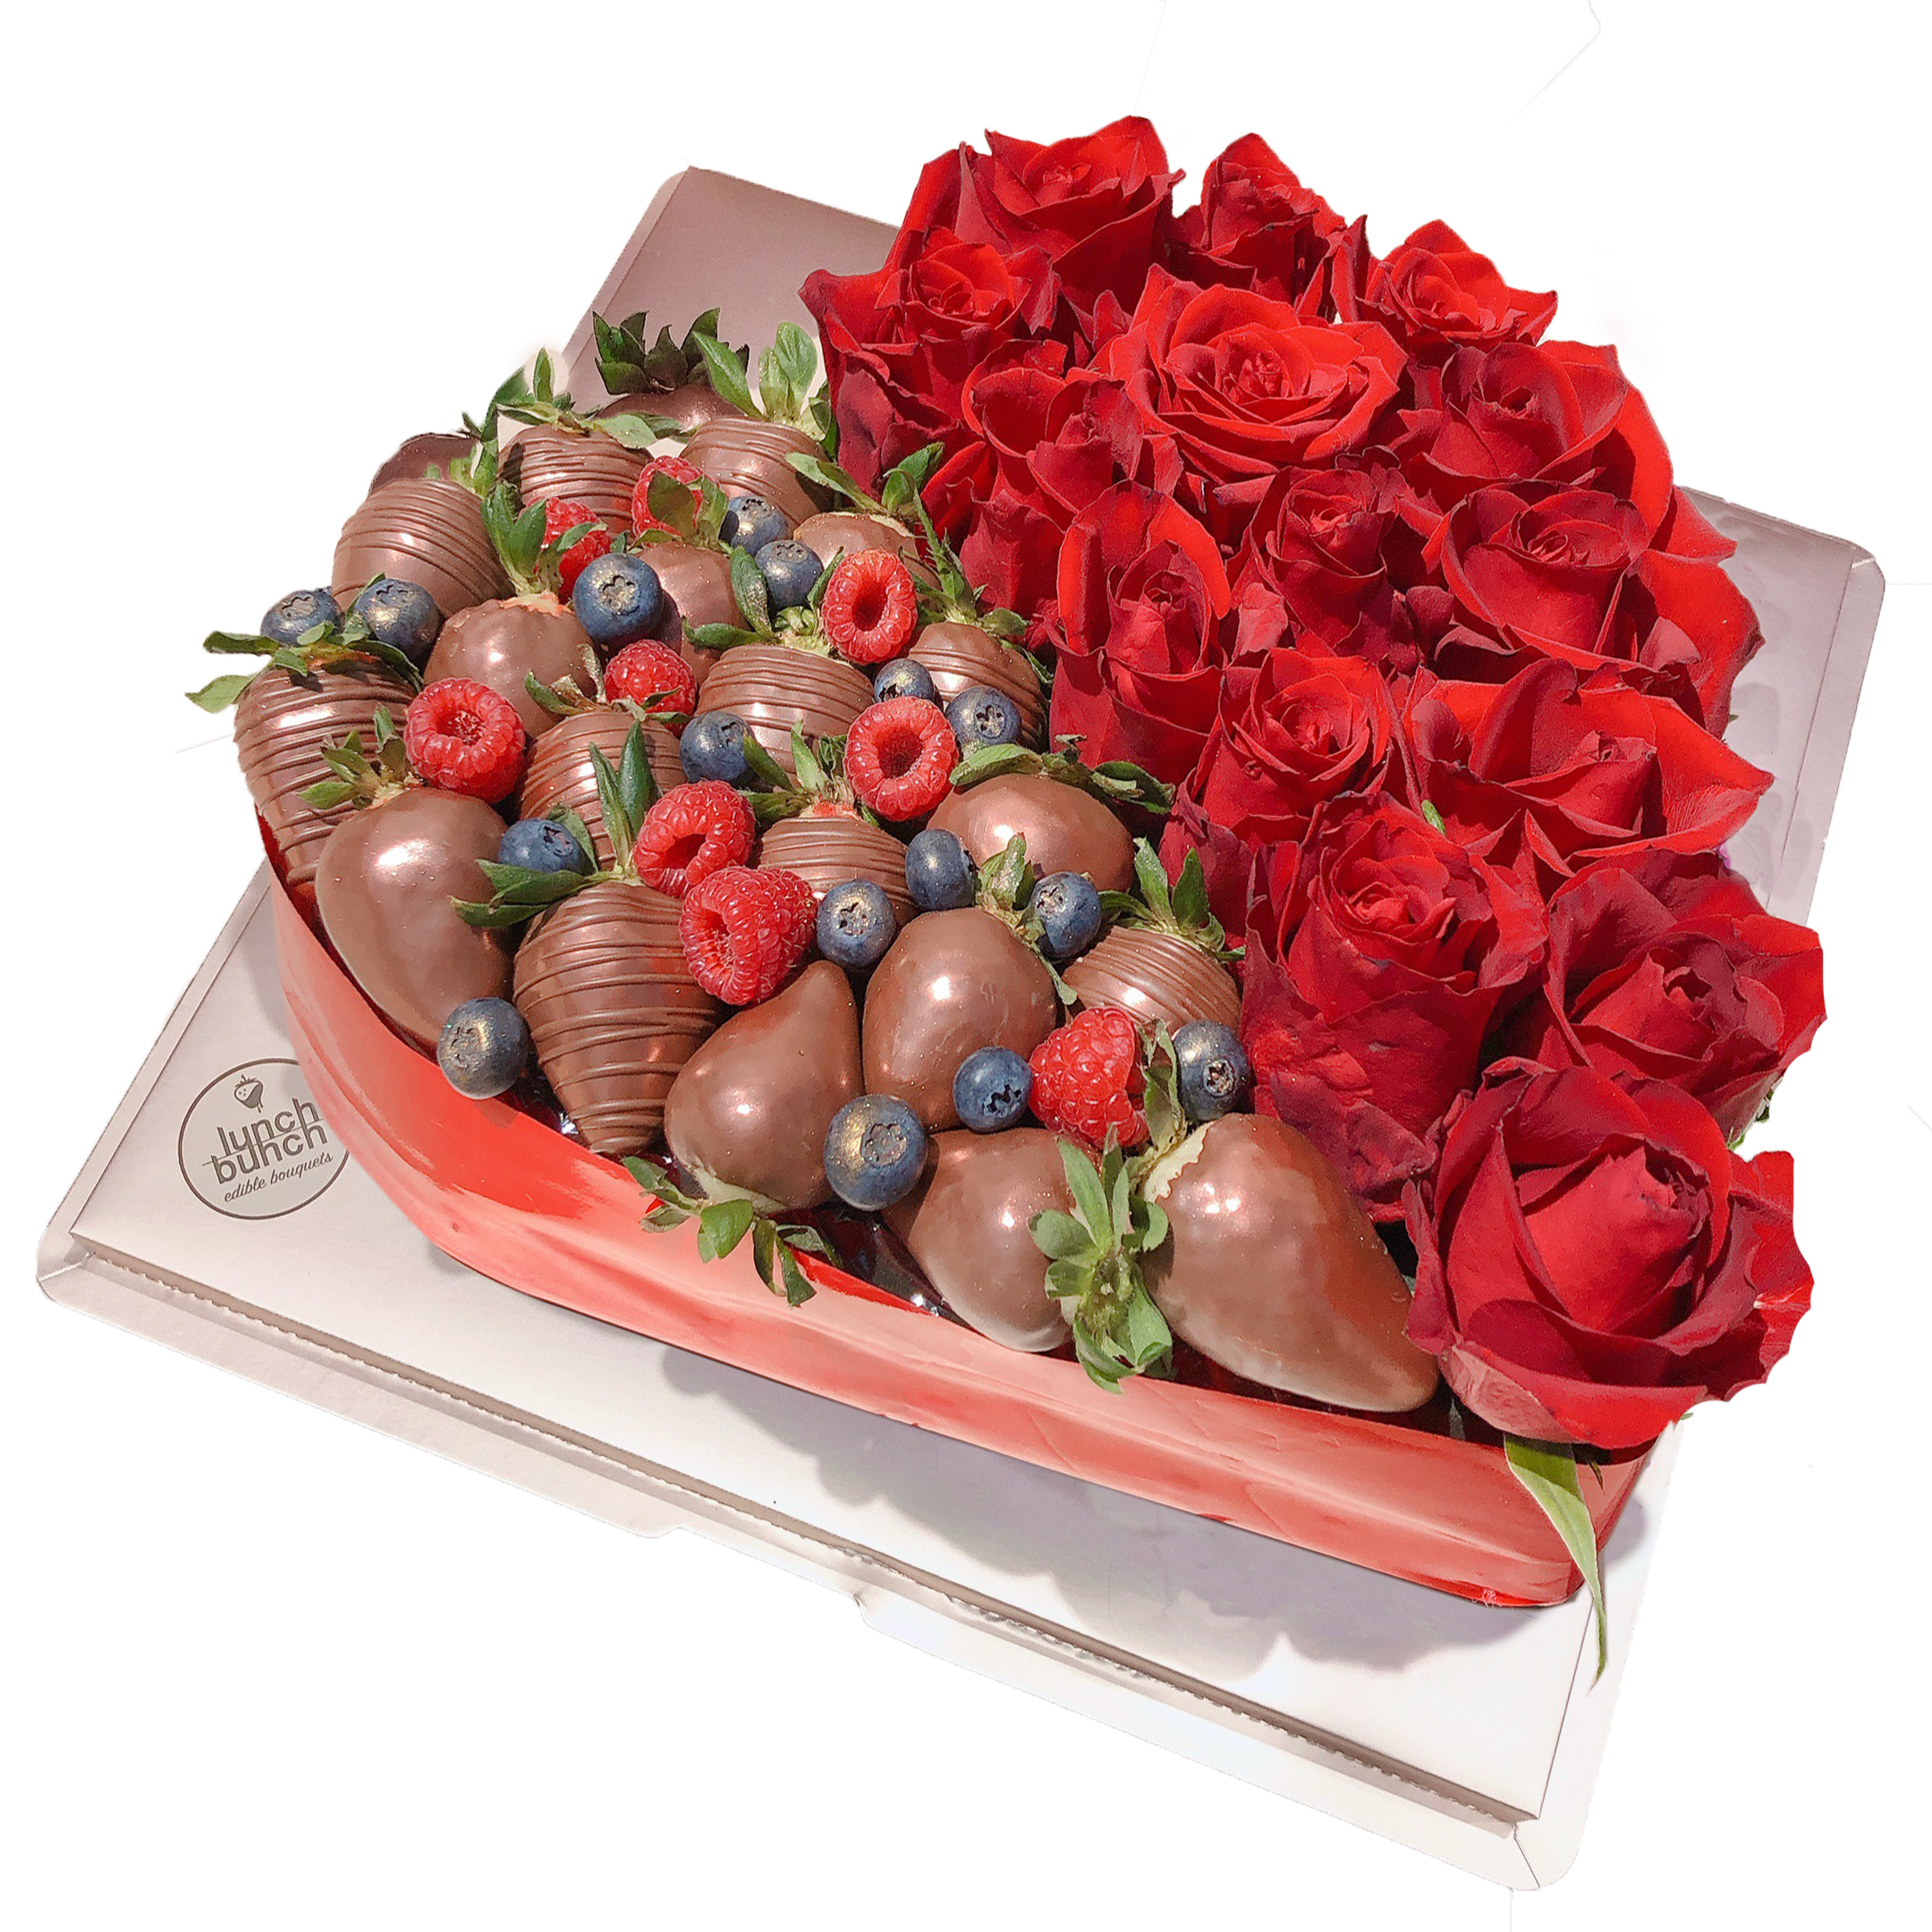 Love Heart Chocolate Roses is romantic gift for her, heart shape flowers box with chocolate and strawberry 